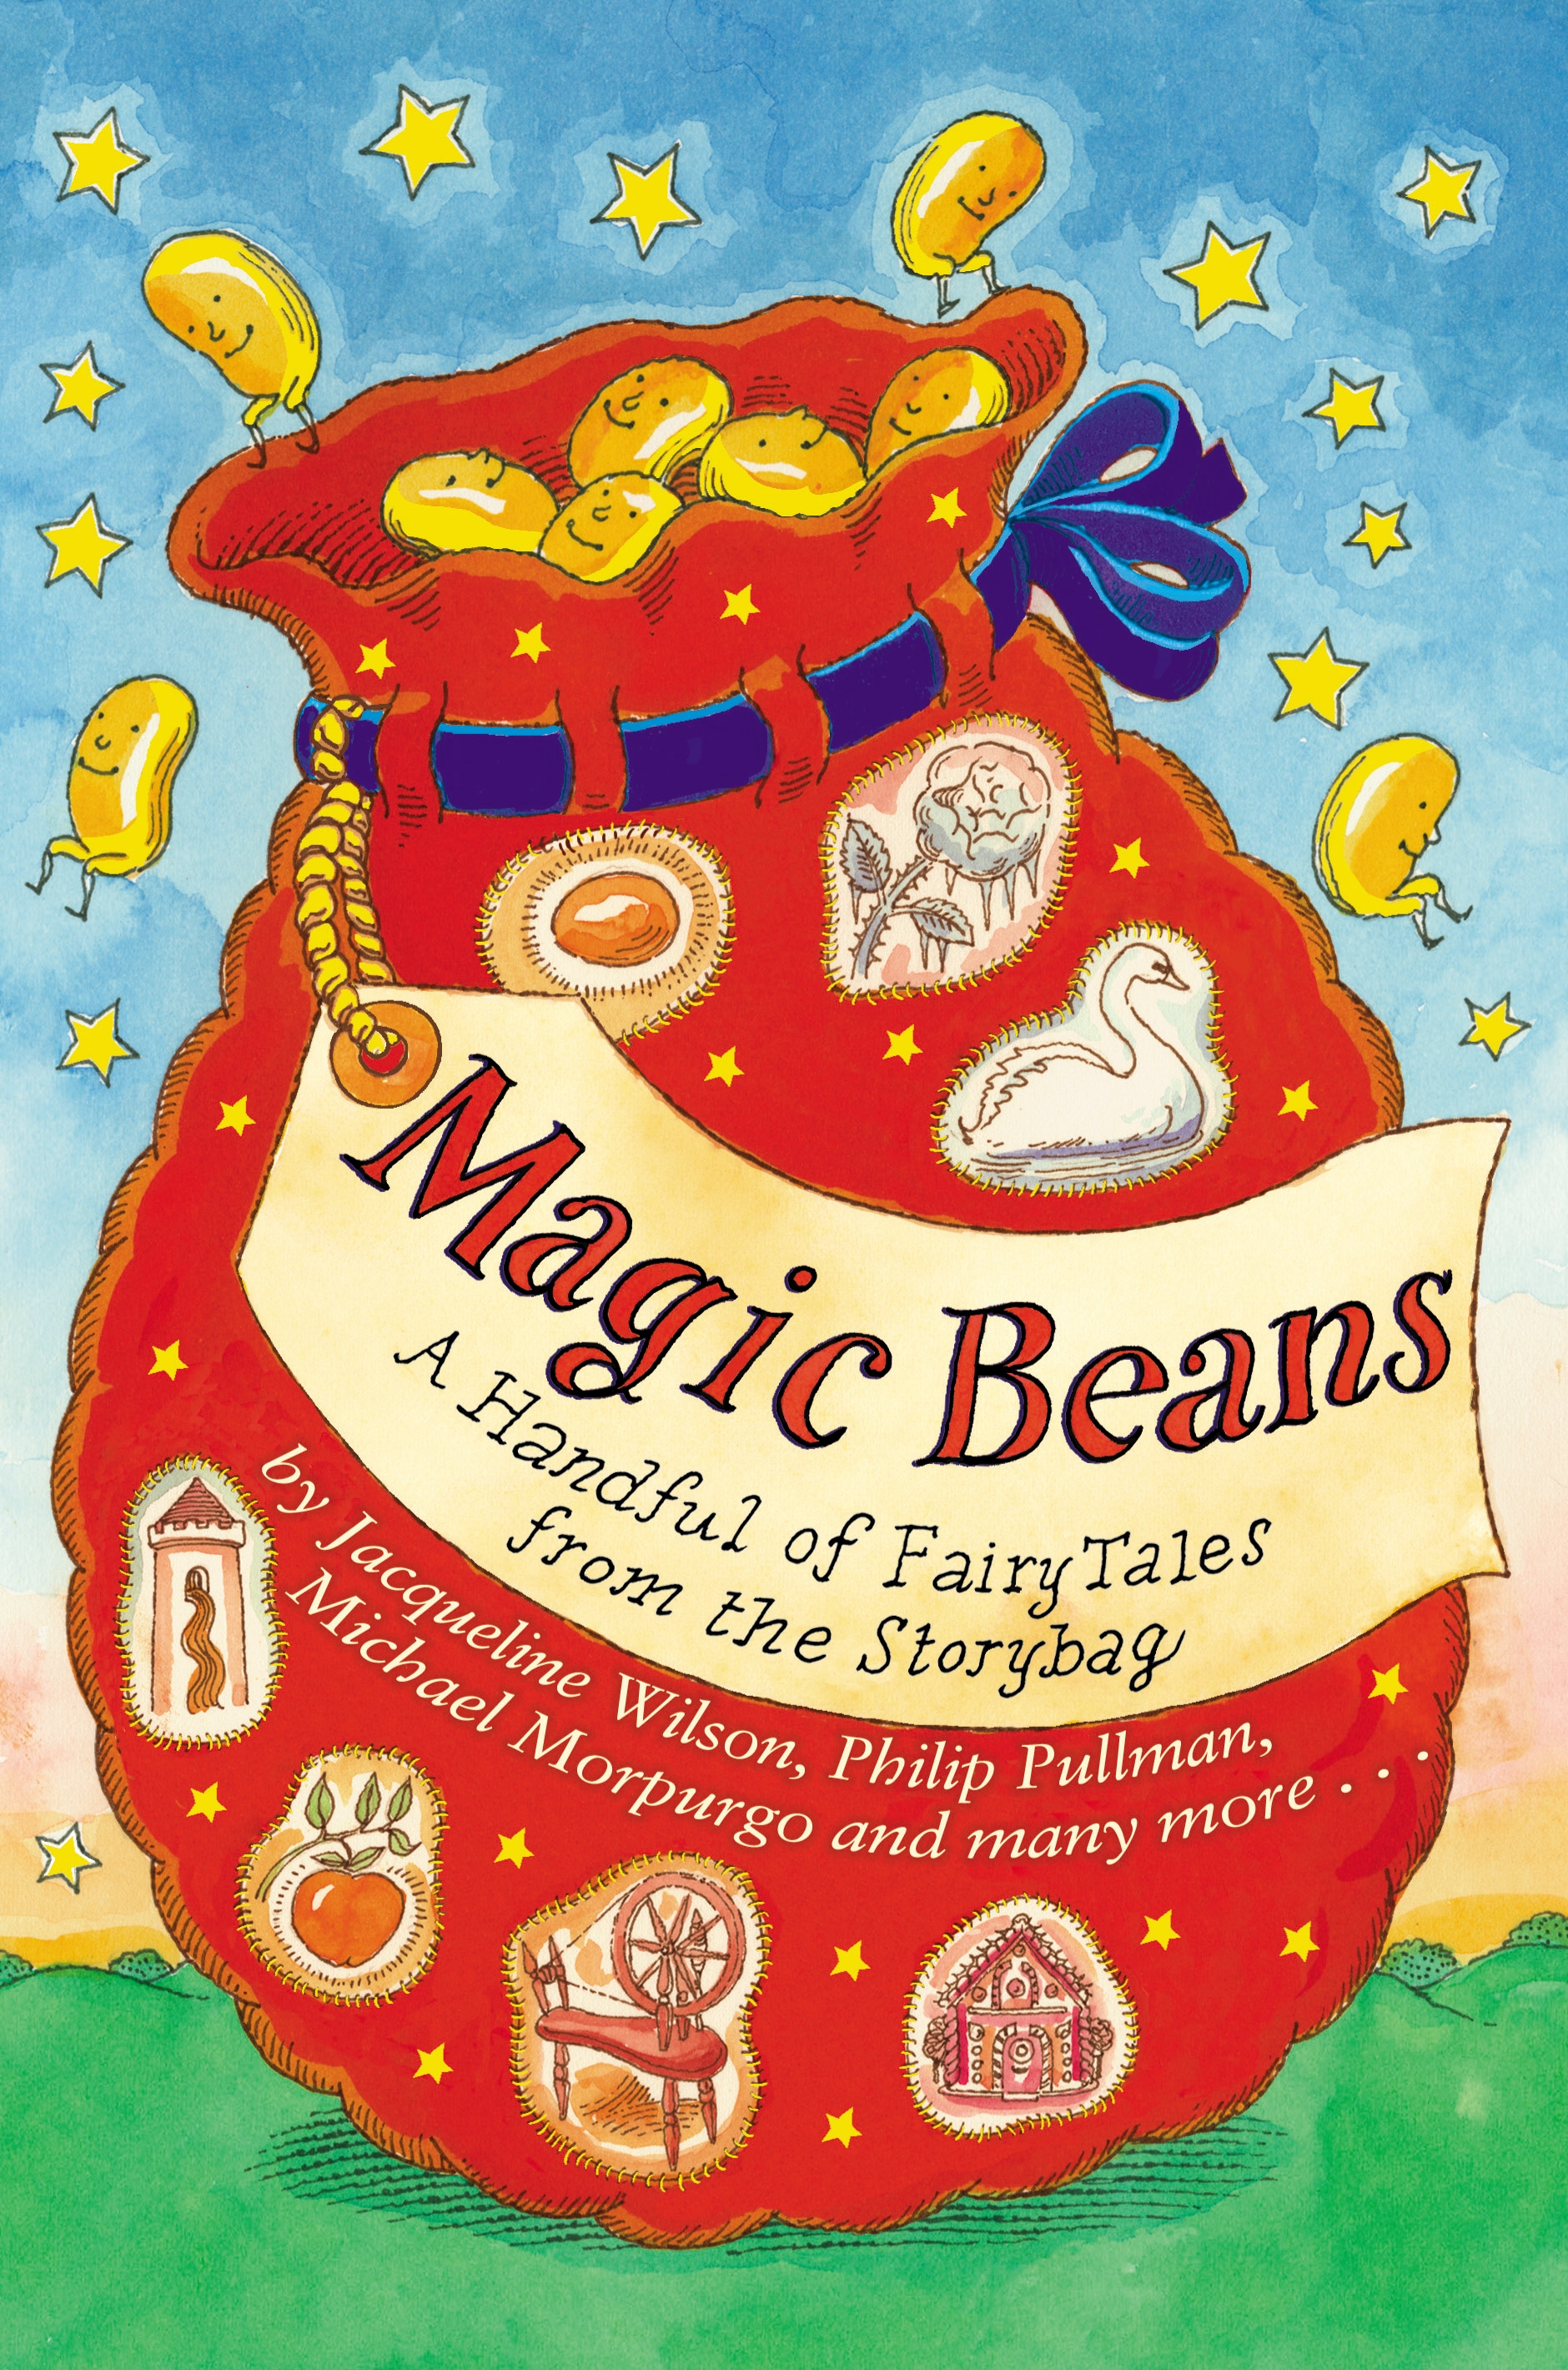 Magic Beans: A Handful of Fairytales from the Storybag by Adèle Geras ...